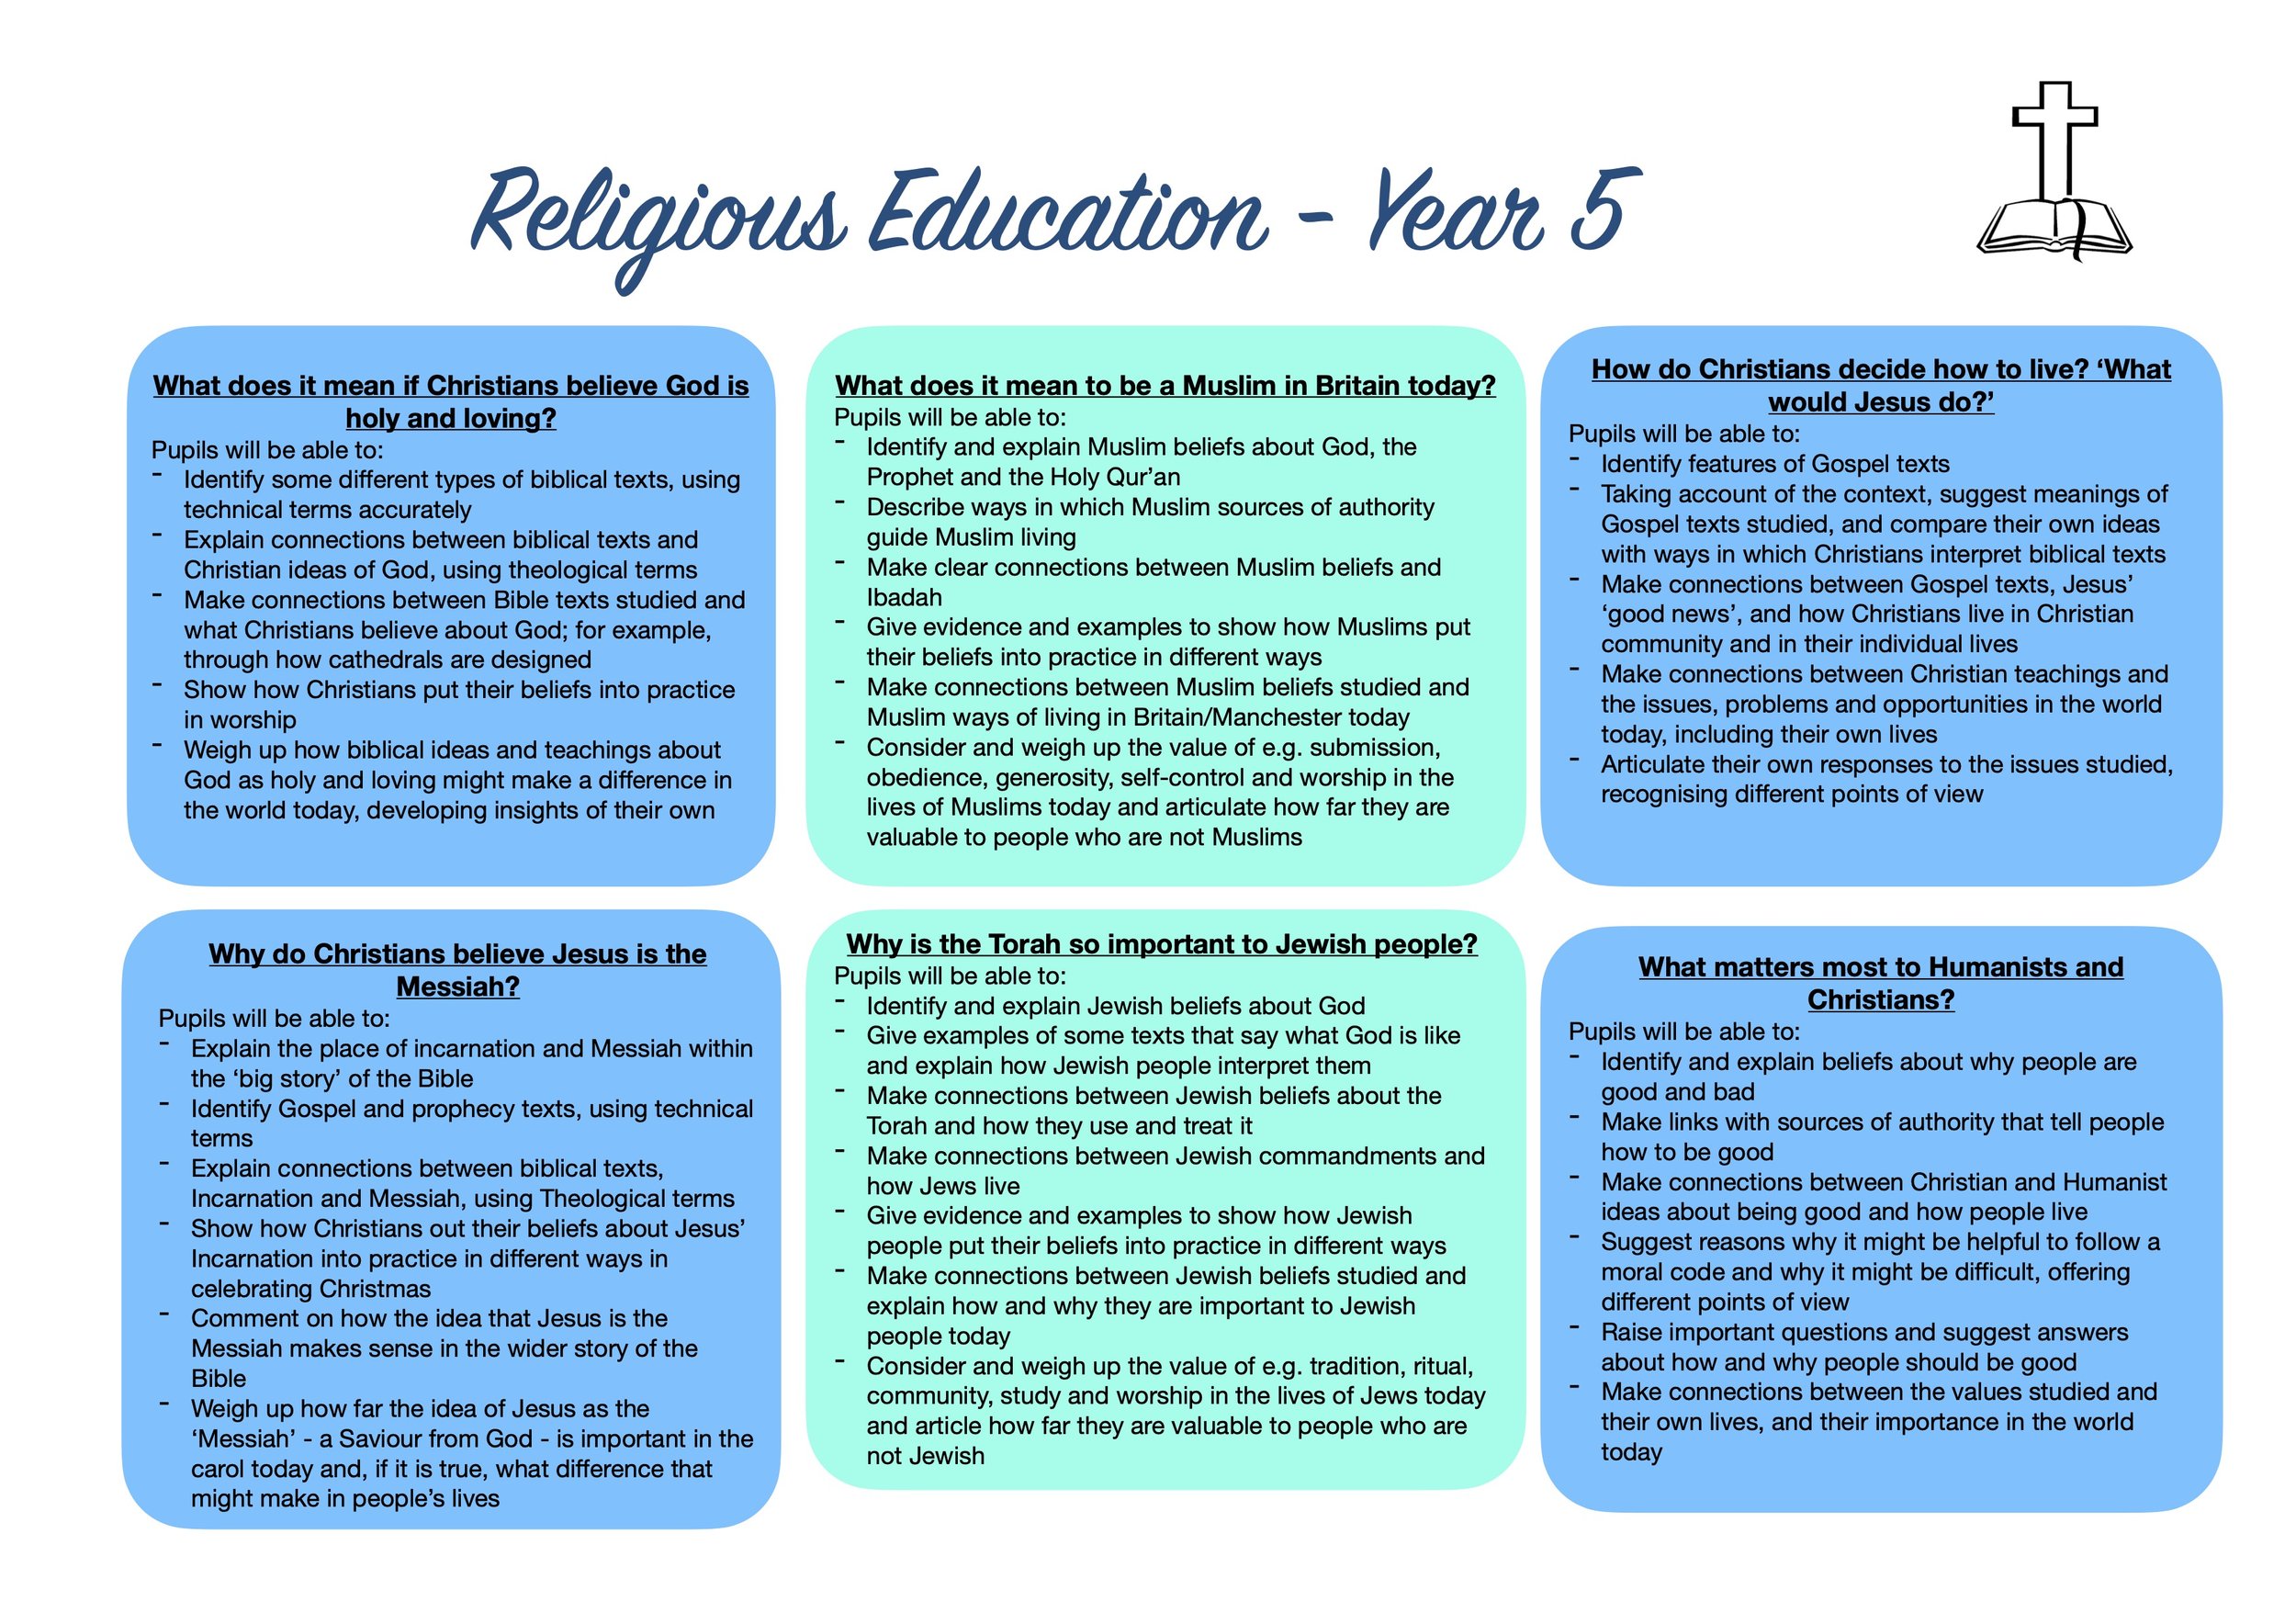 Religious Education Overview